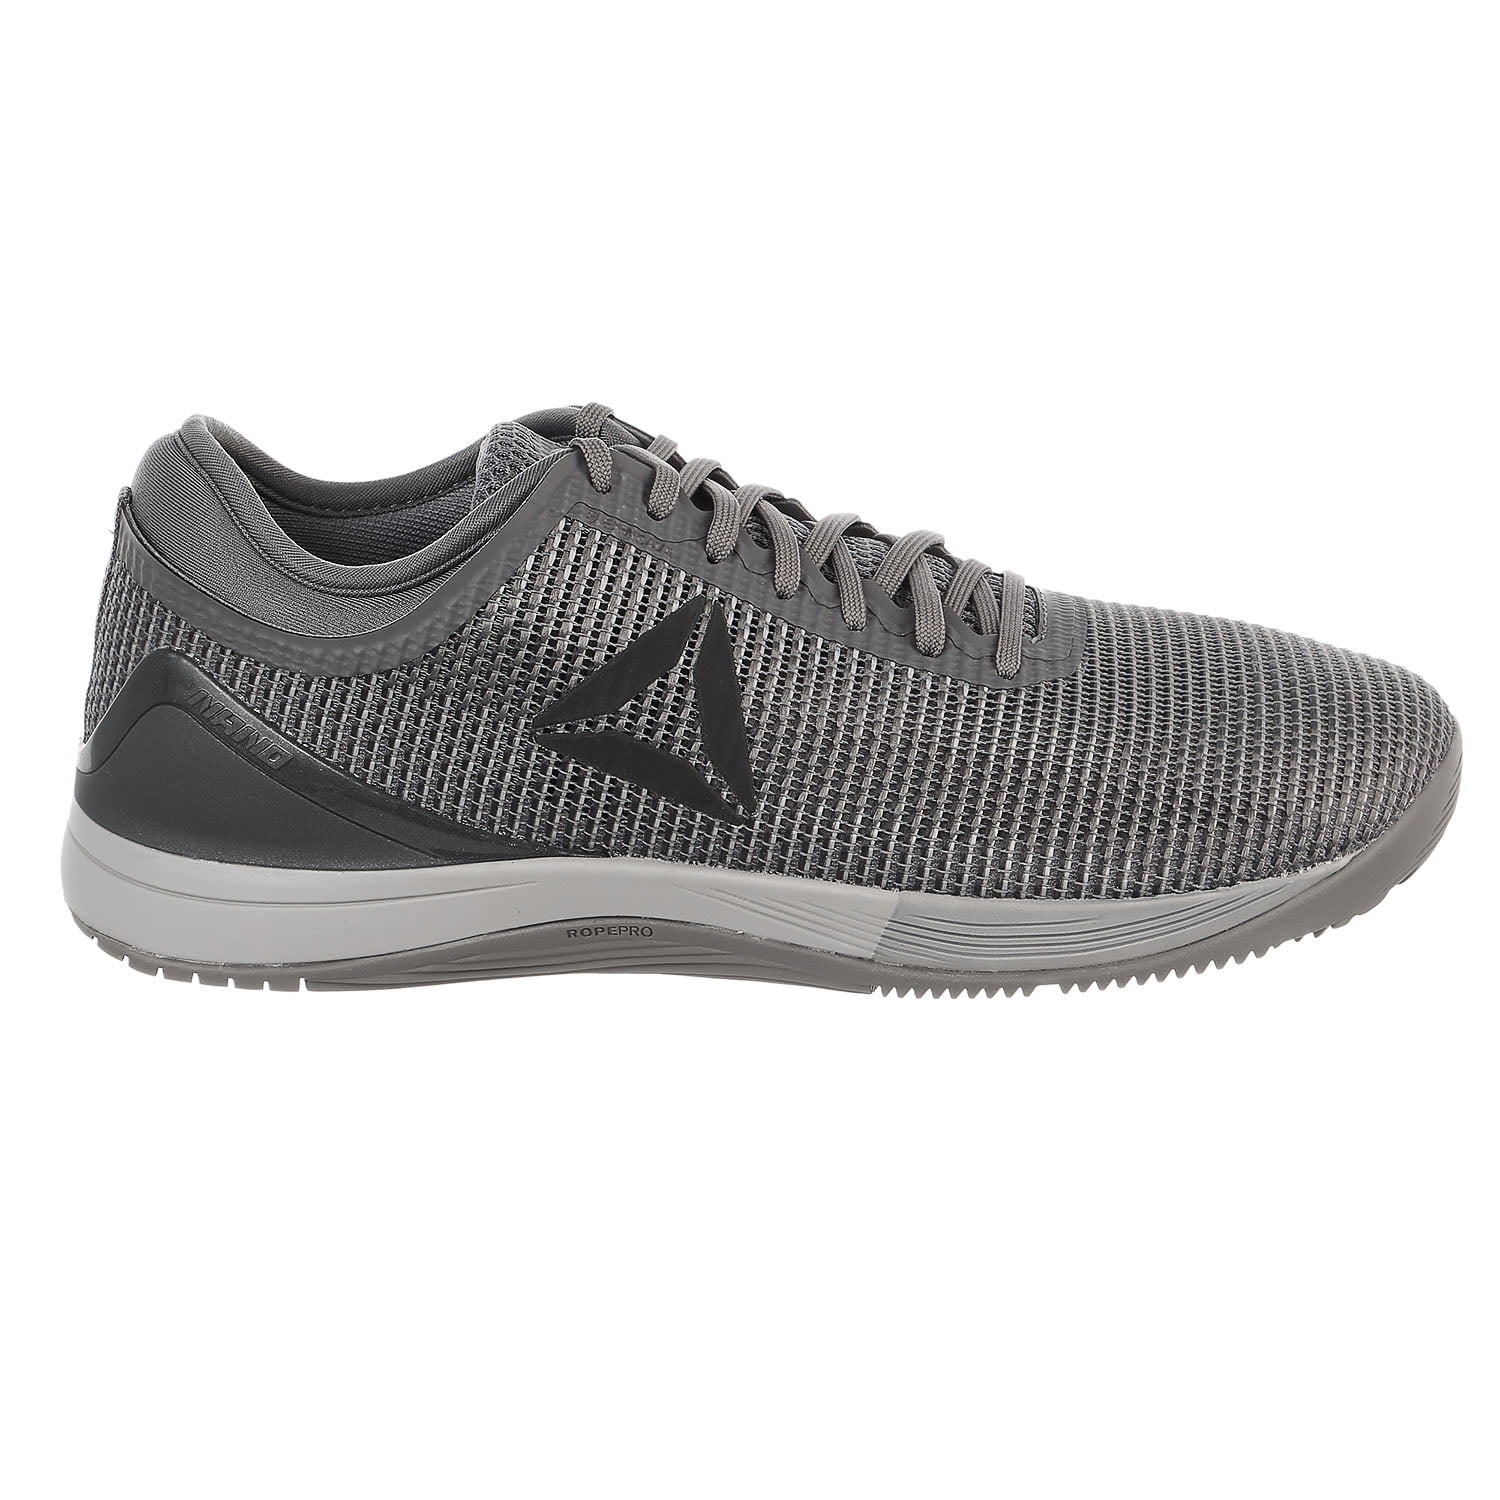 stores that carry reebok crossfit nano